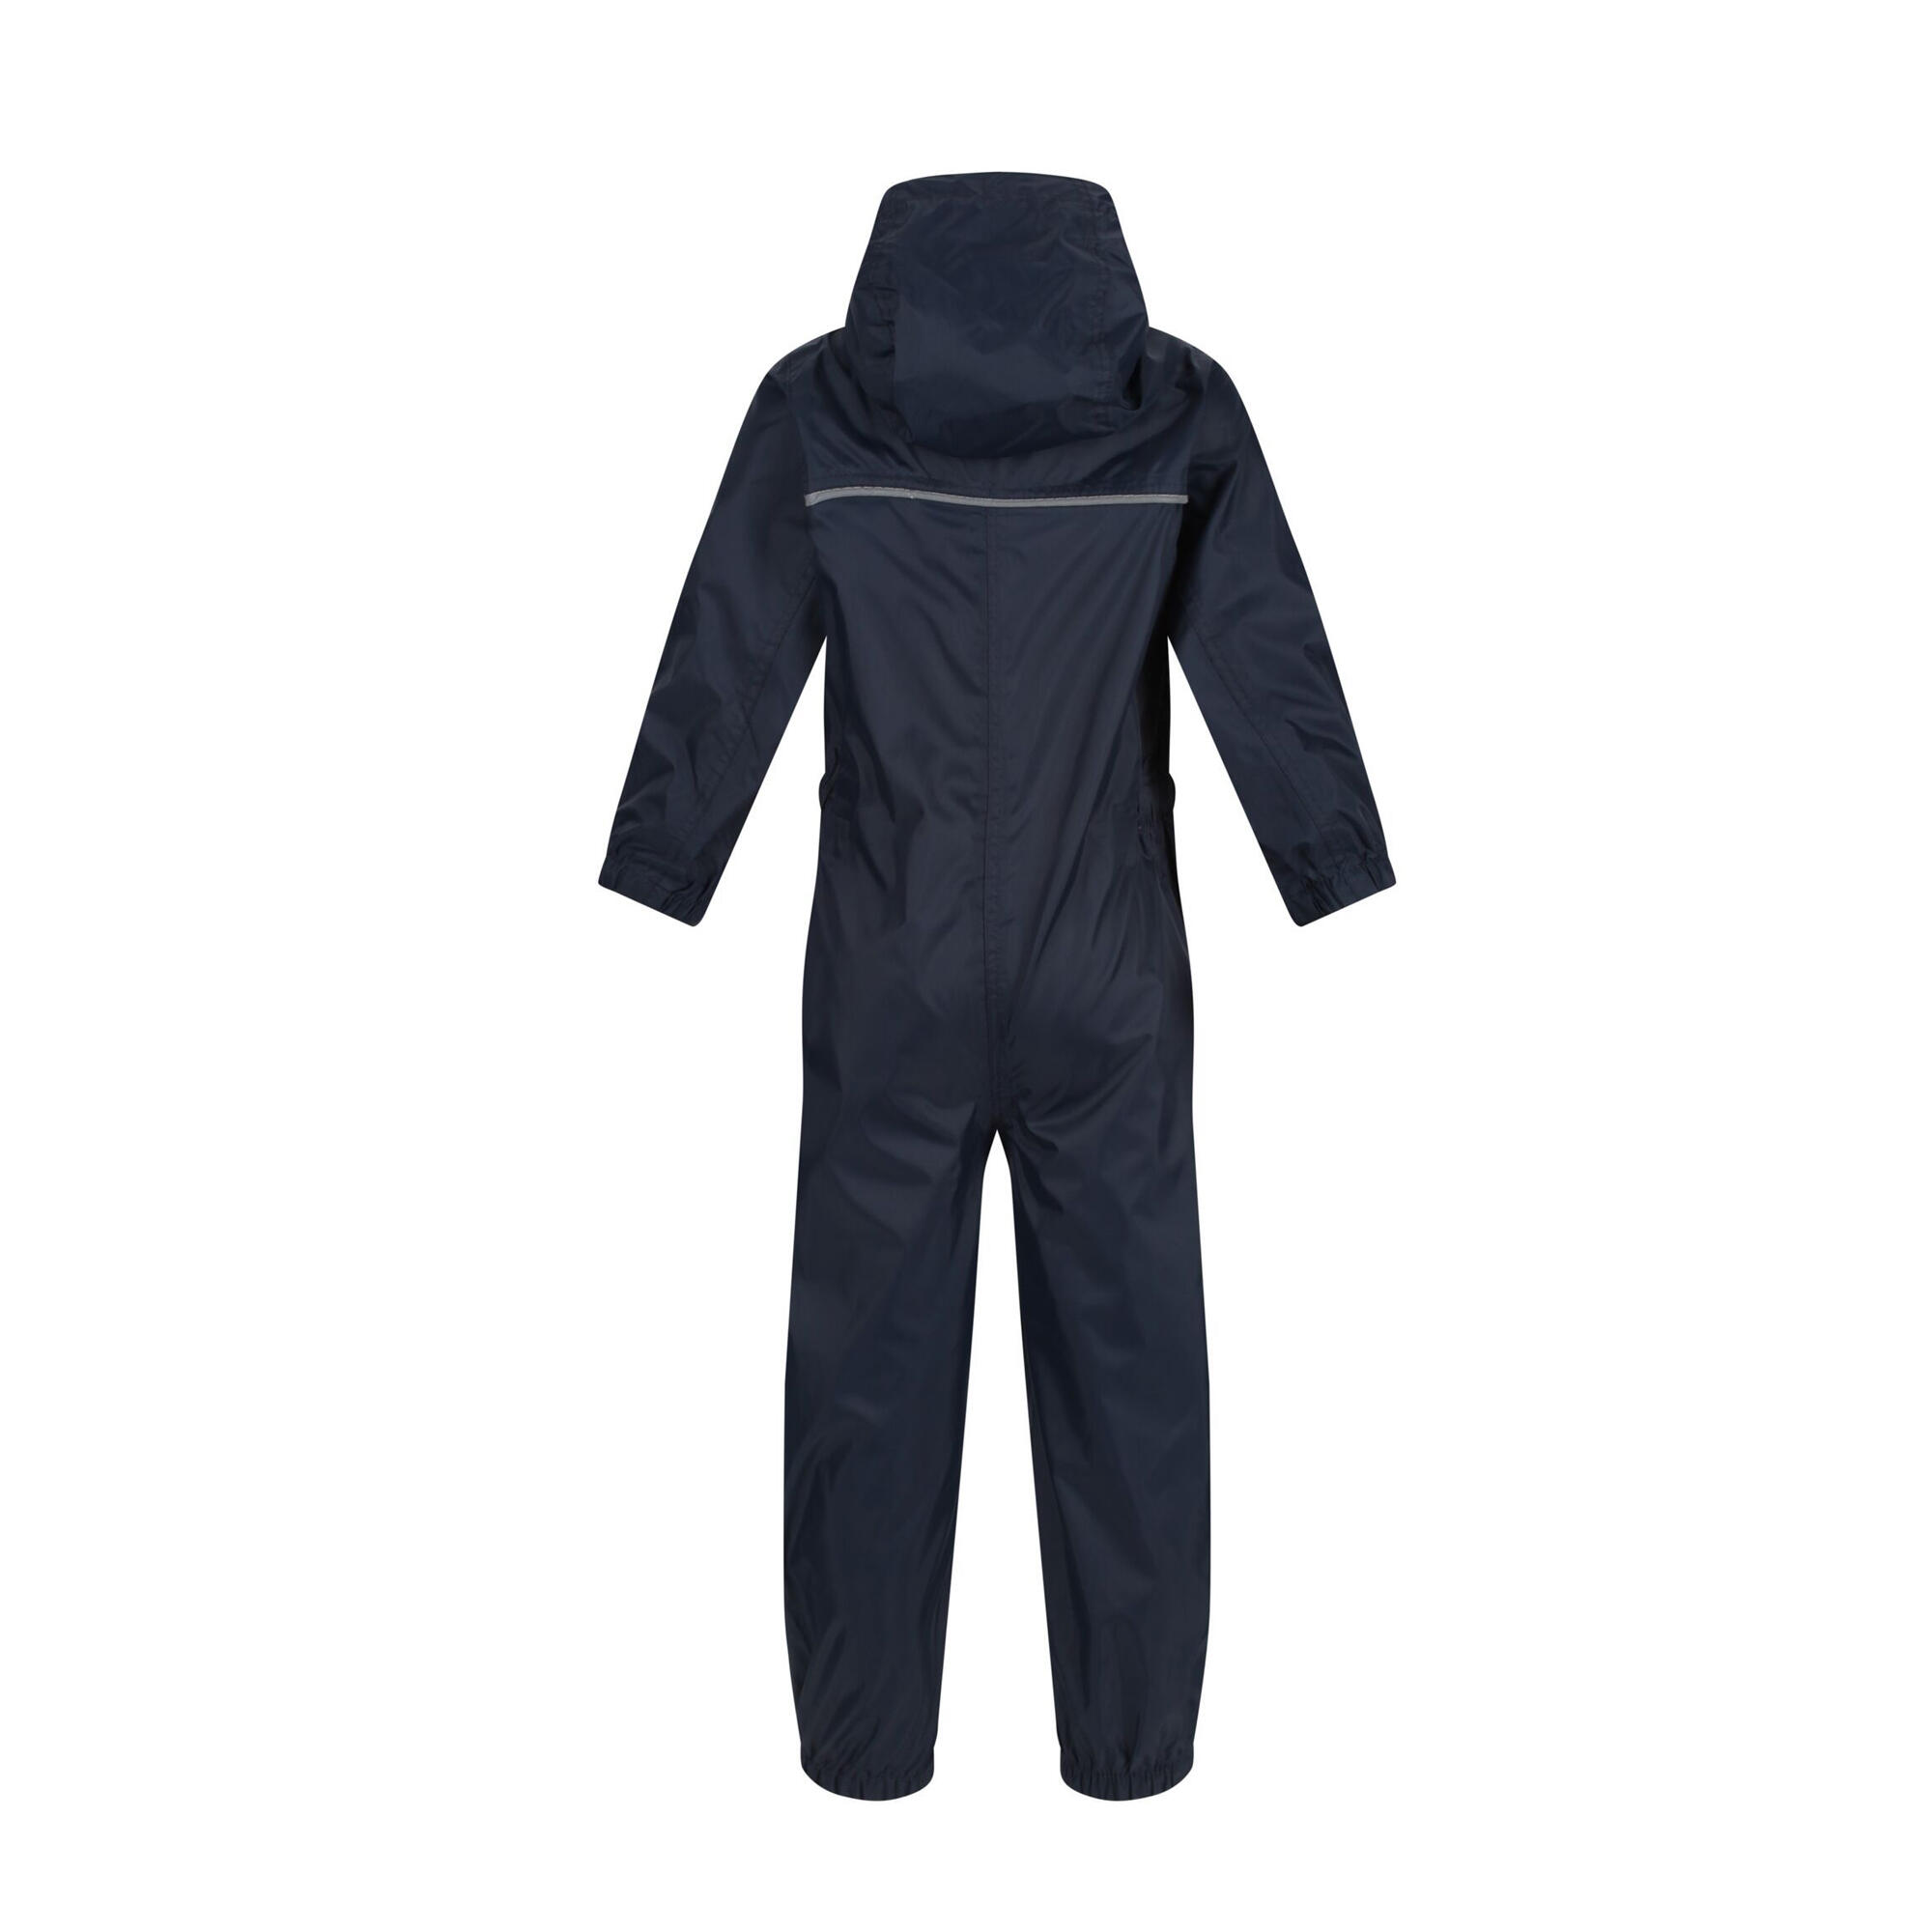 Great Outdoors Childrens Toddlers Puddle IV Waterproof Rainsuit (Navy) 3/5